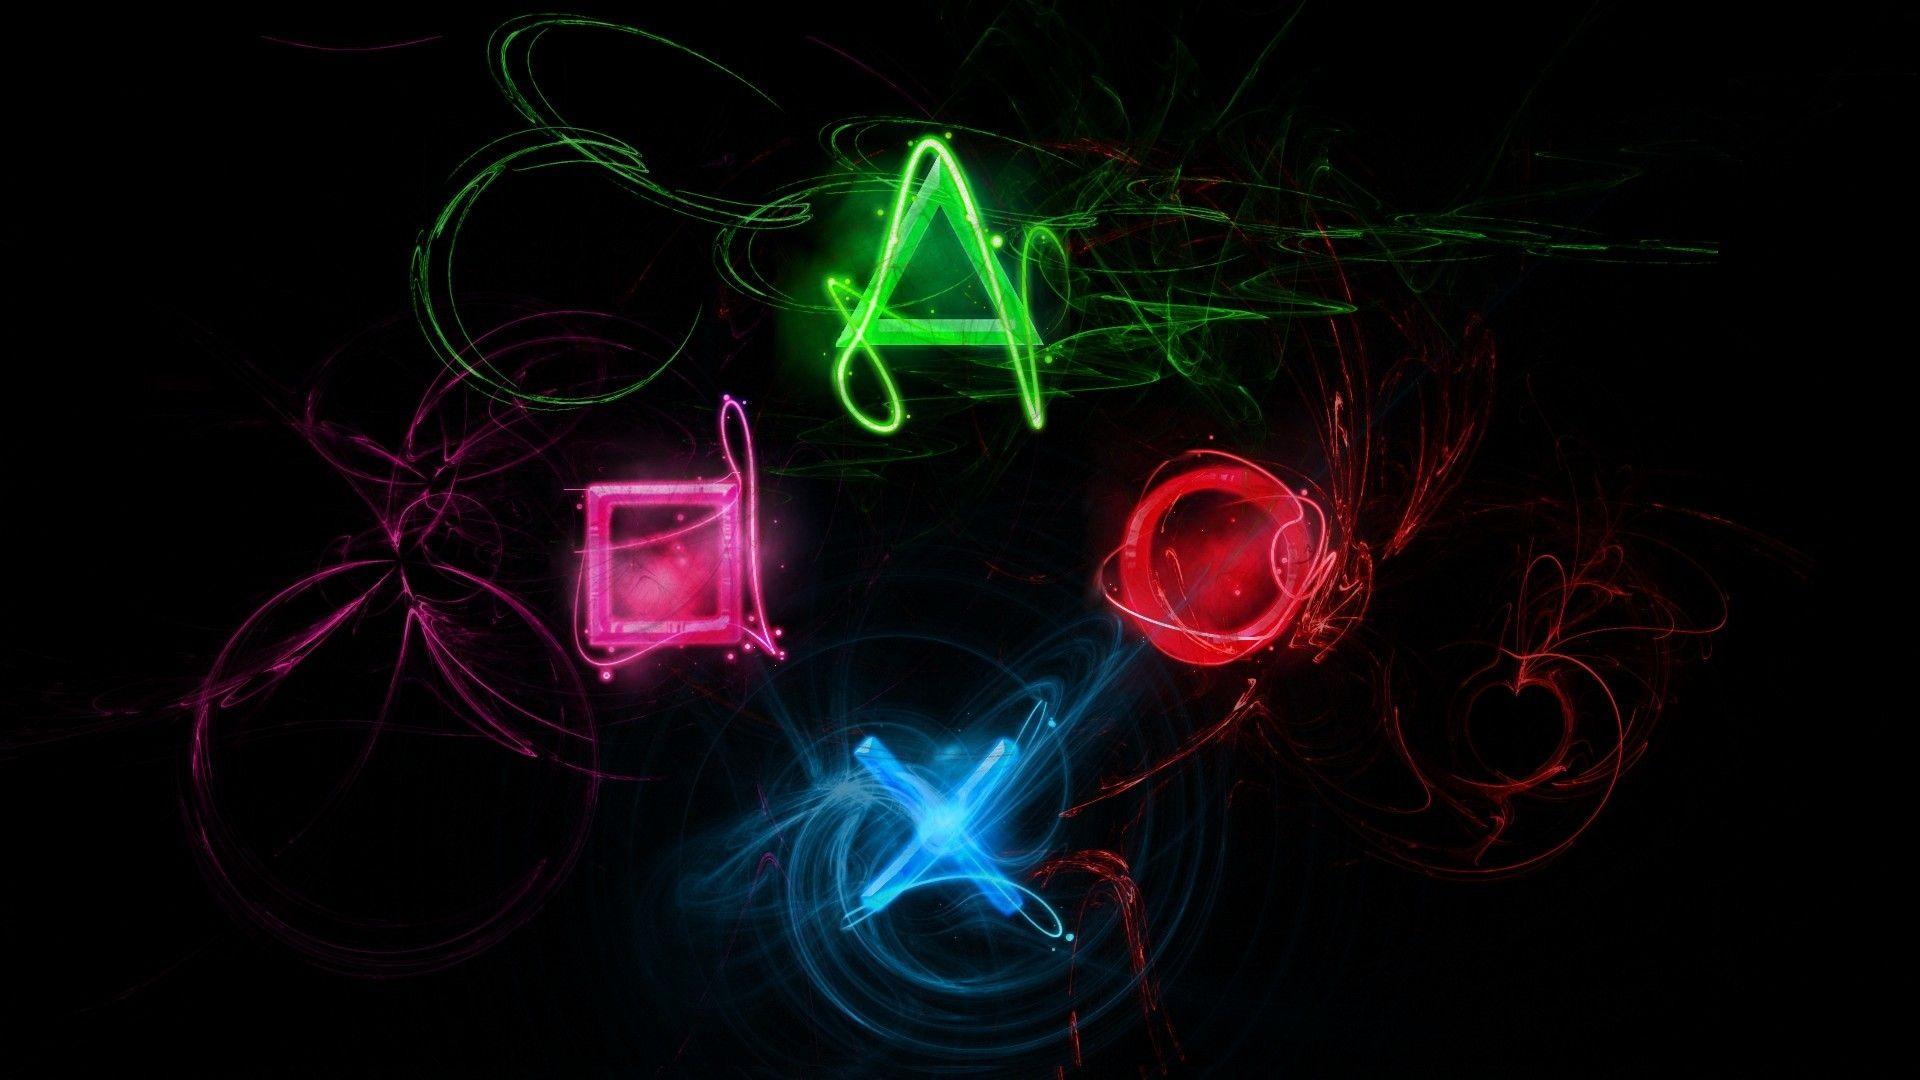 Cool PS4 Wallpapers - Top Free Cool PS4